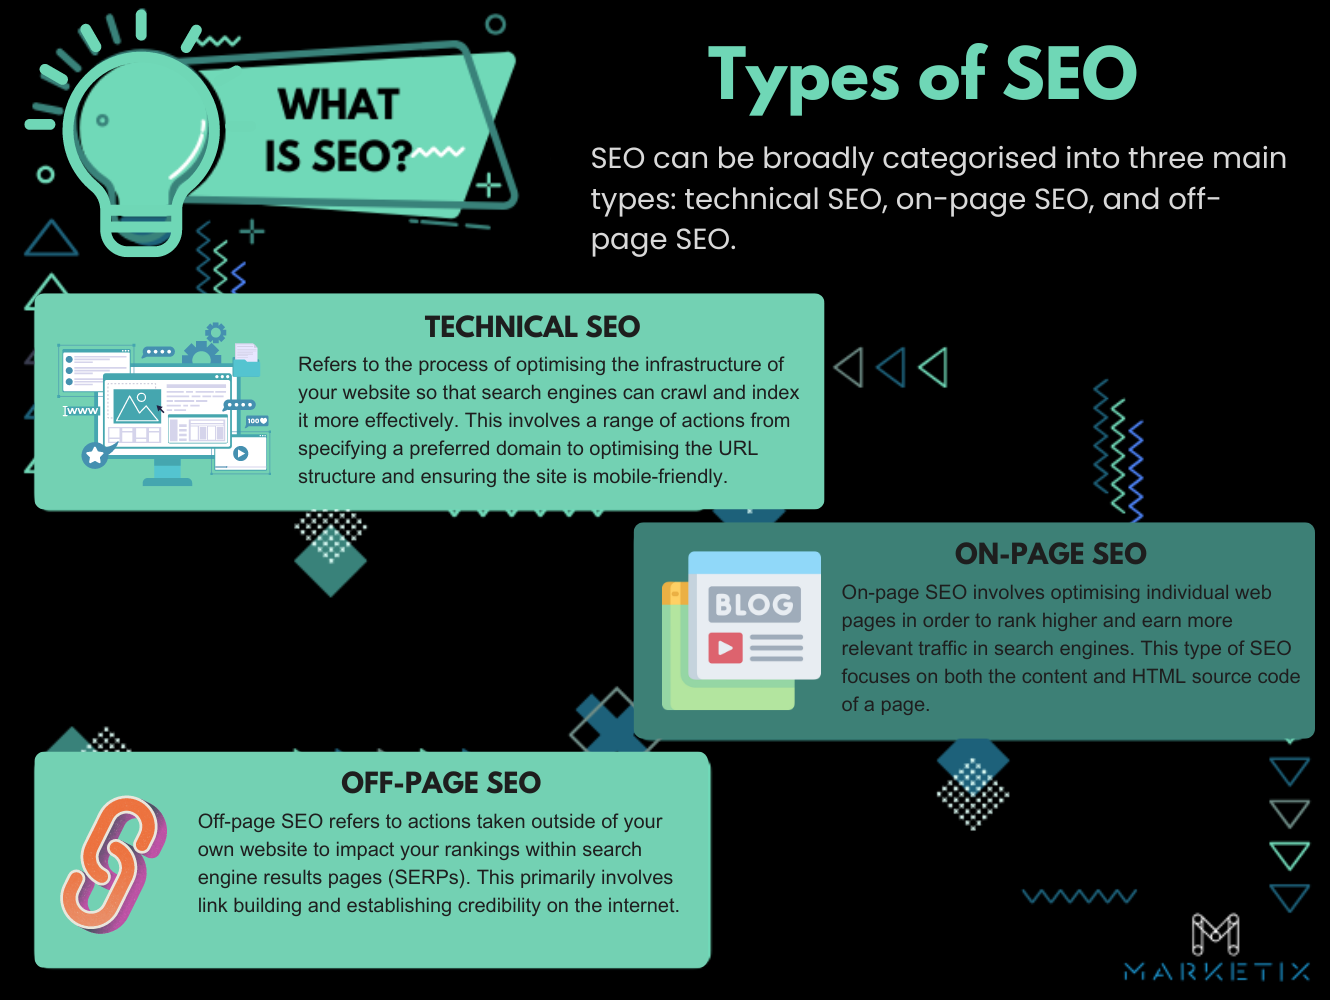 Types of Search Engine Optimisation